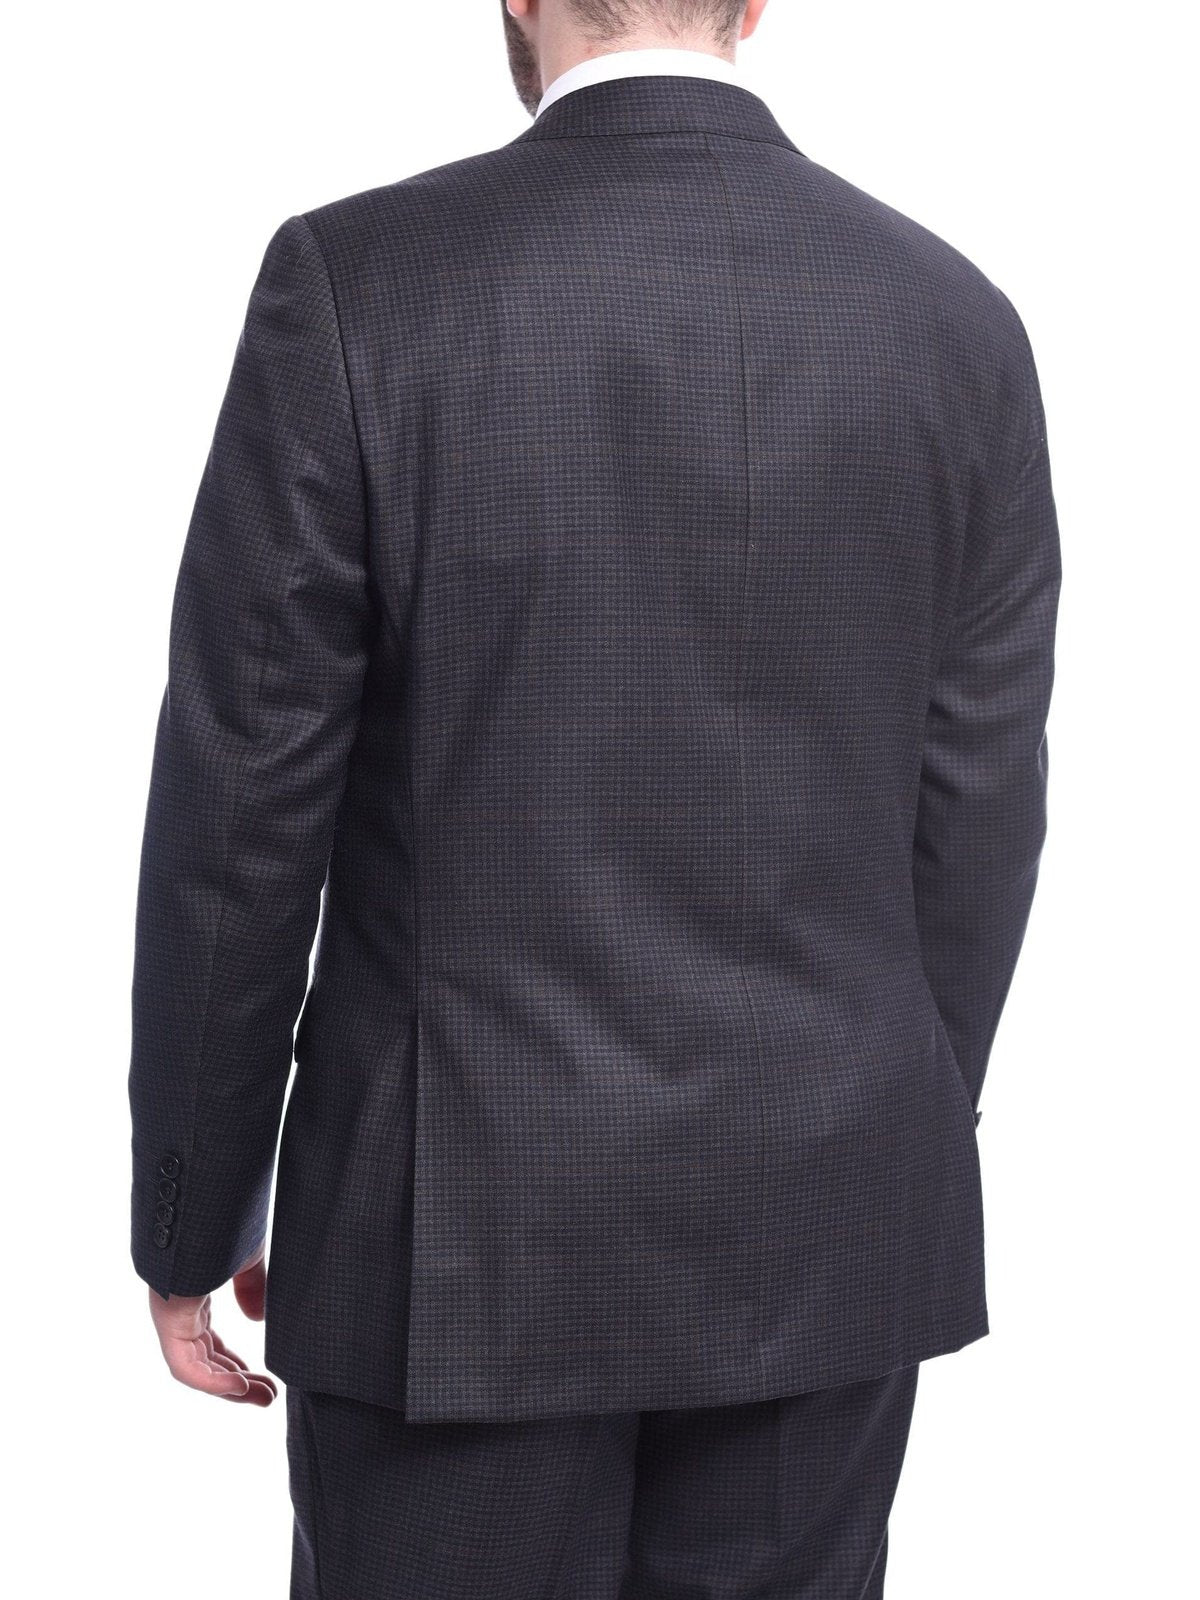 Napoli TWO PIECE SUITS Napoli Classic Fit Charcoal Gray Check Half Canvassed Super 150s Wool Suit